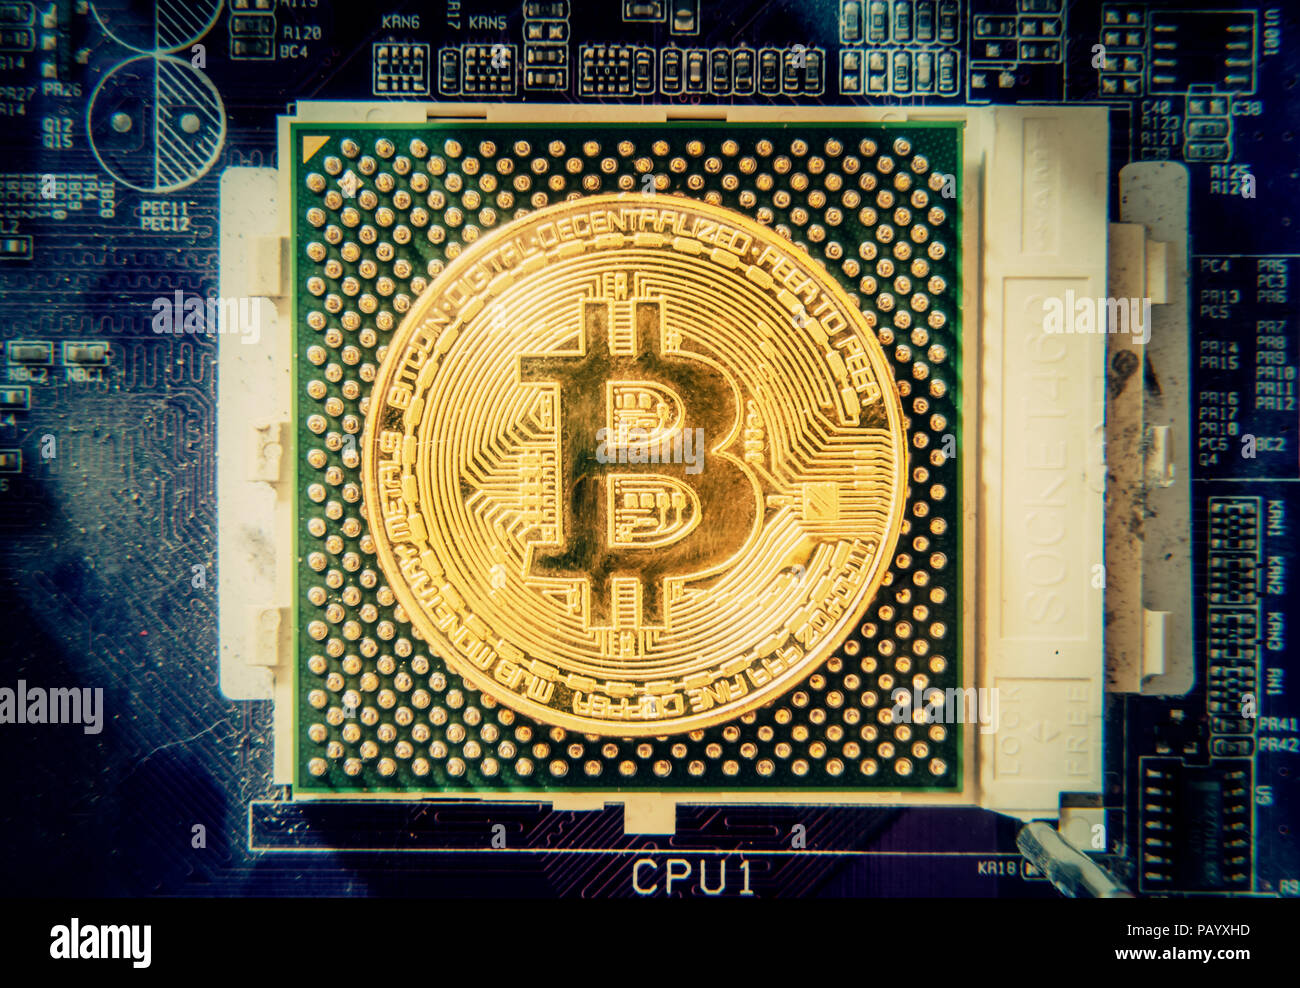 A big golden physical bitcoin (digital virtual crypto-currency) replacing a CPU on a motherboard. Stock Photo